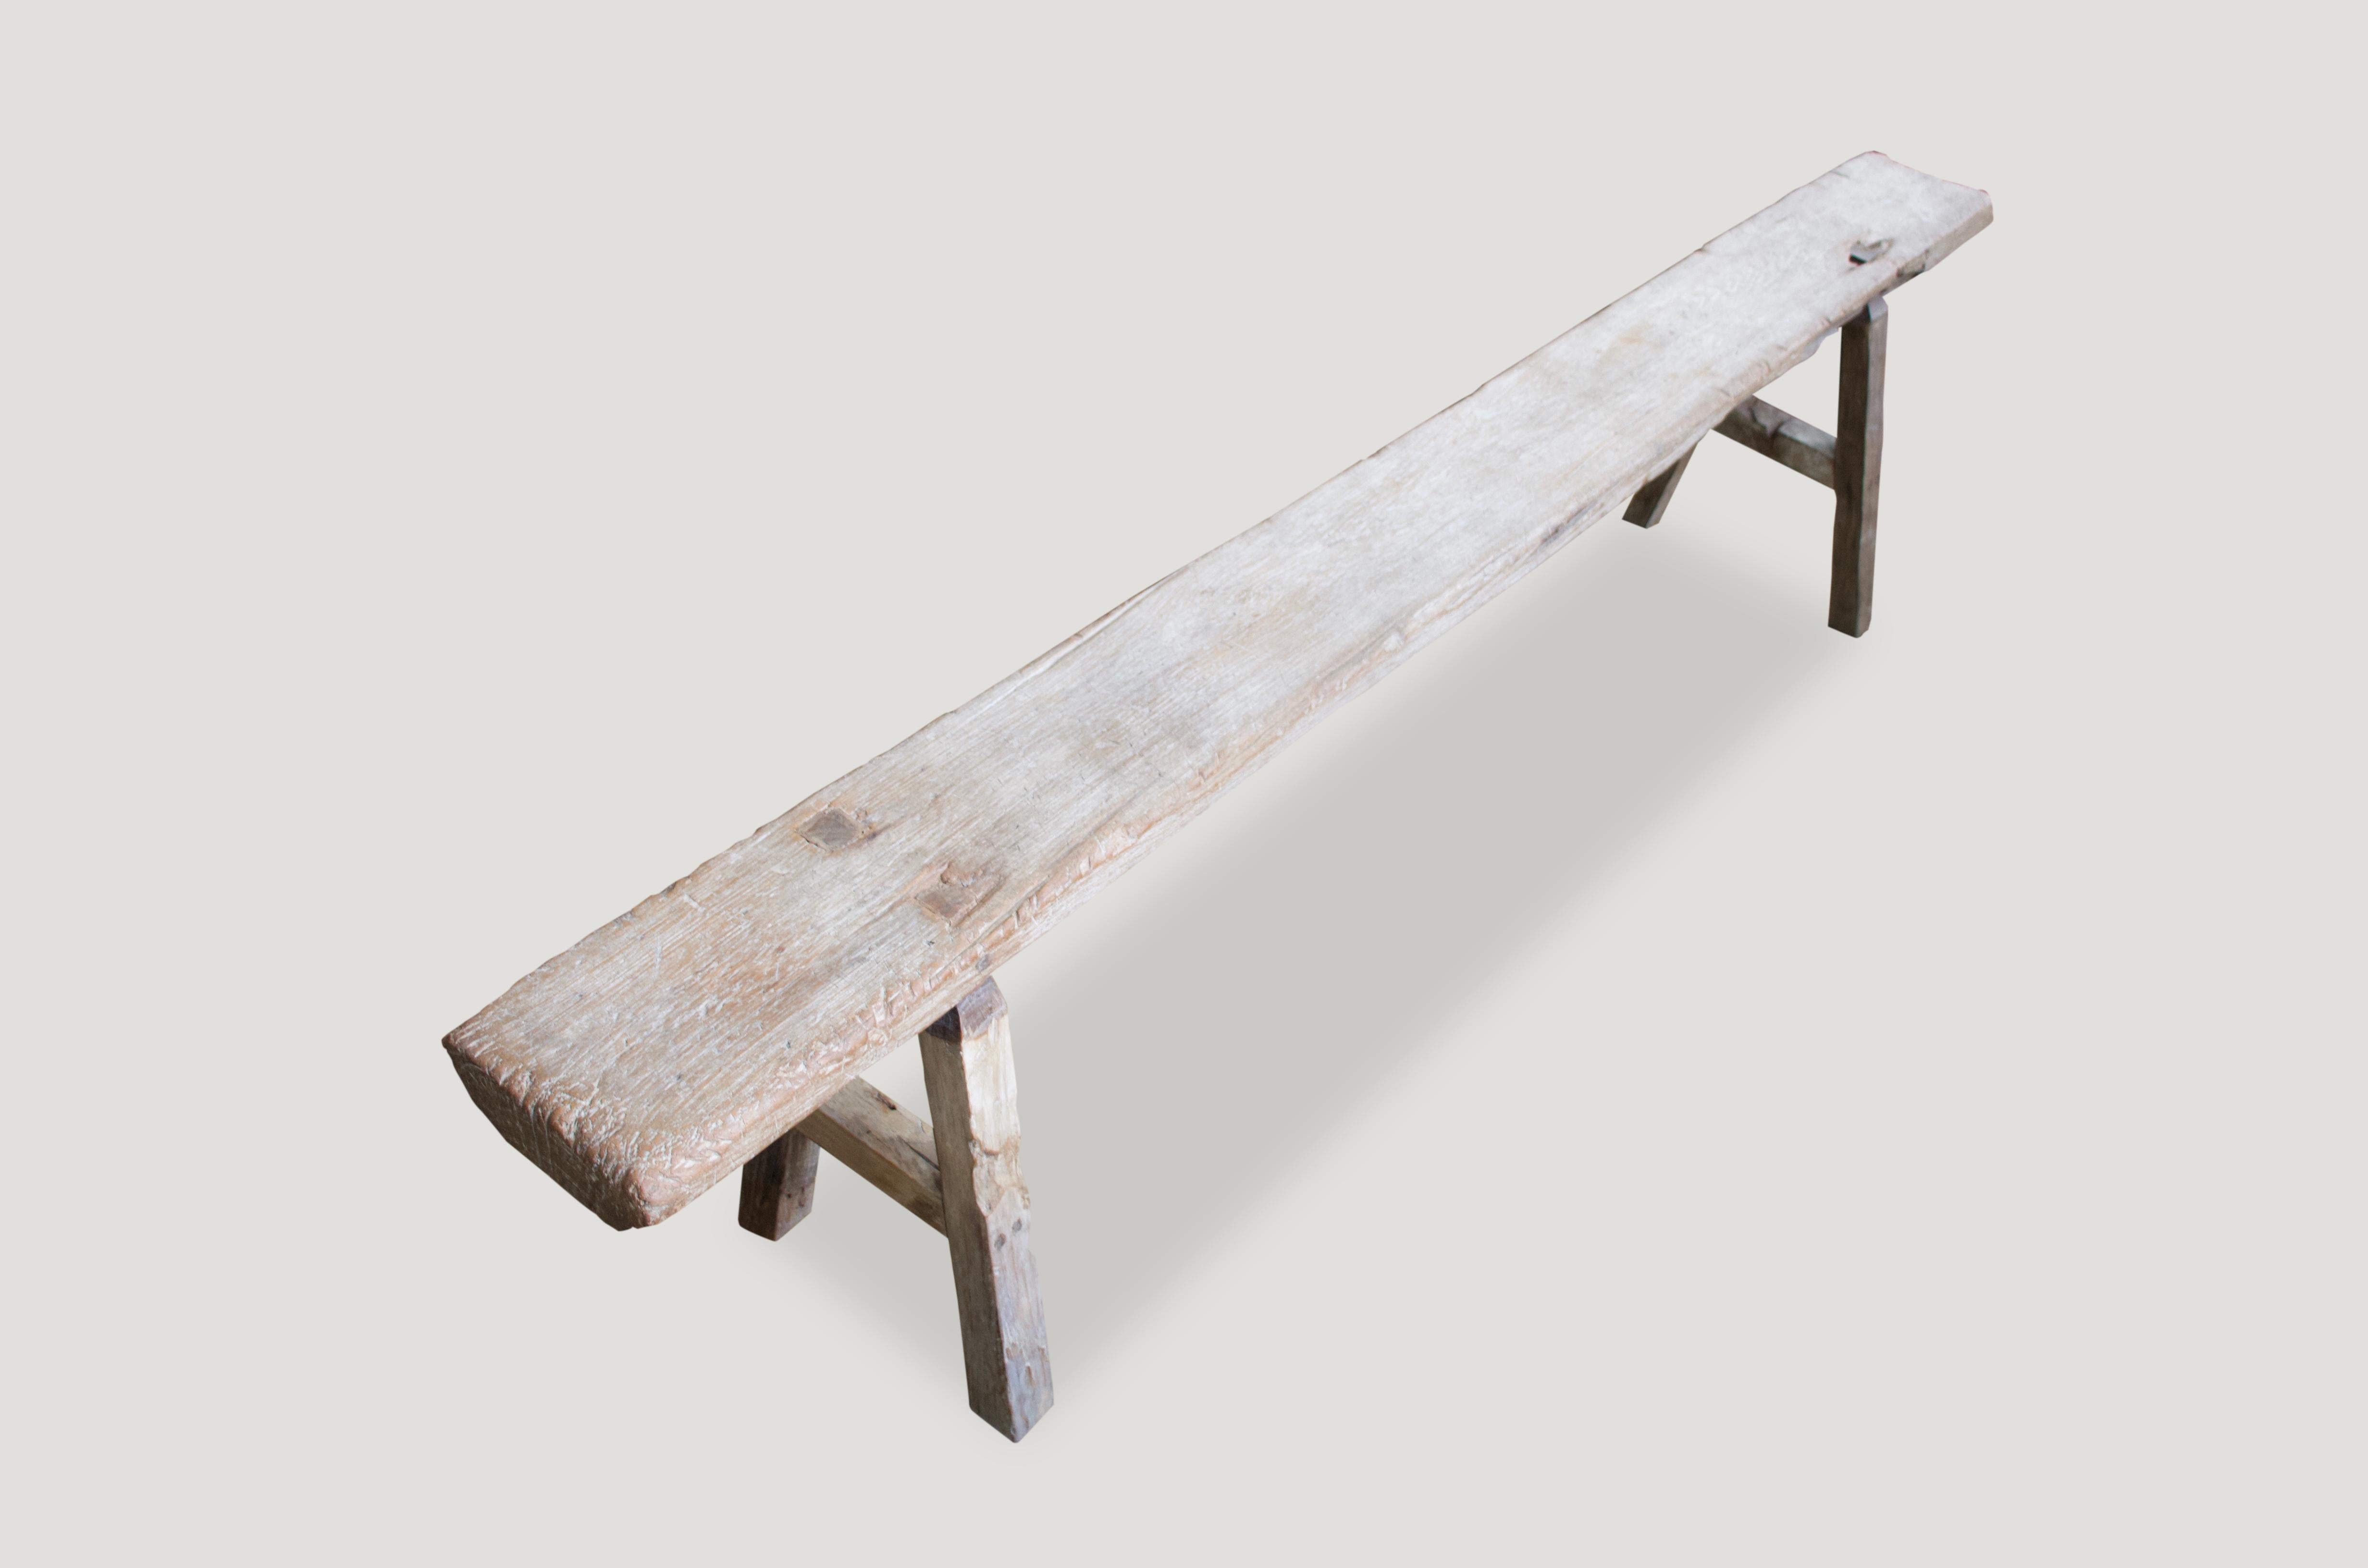 Antique hand carved teakwood bench with nice patina. This can also be used as a shelf. Great for inside or outside living.

This bench was sourced in the spirit of wabi-sabi, a Japanese philosophy that beauty can be found in imperfection and